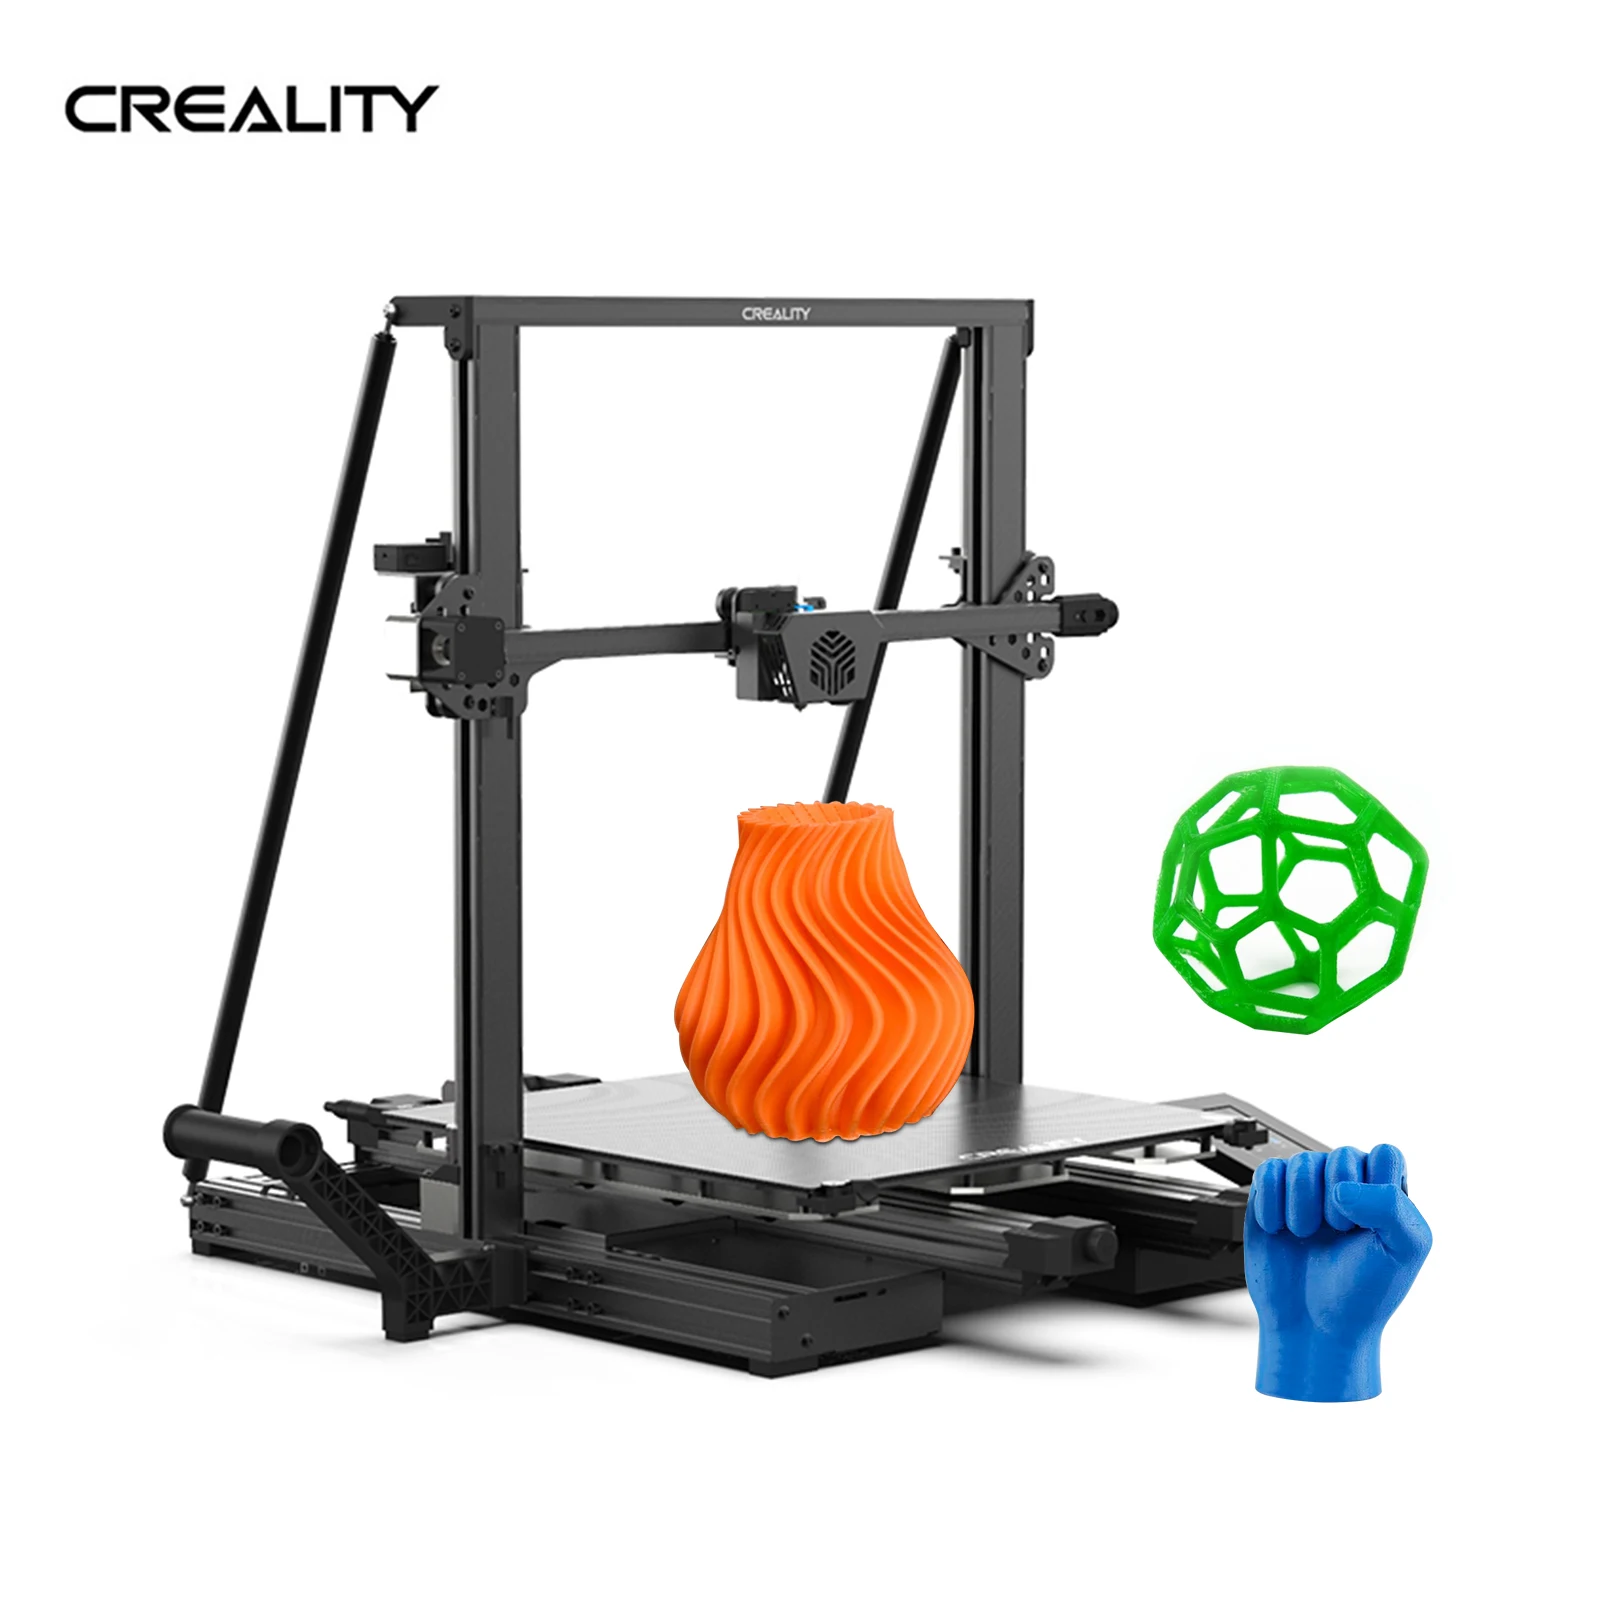 

Creality CR-6 Max High Precision 3D Printer 400x400x400mm Large Print Size Silent Motherboard Support Auto Leveling Filament